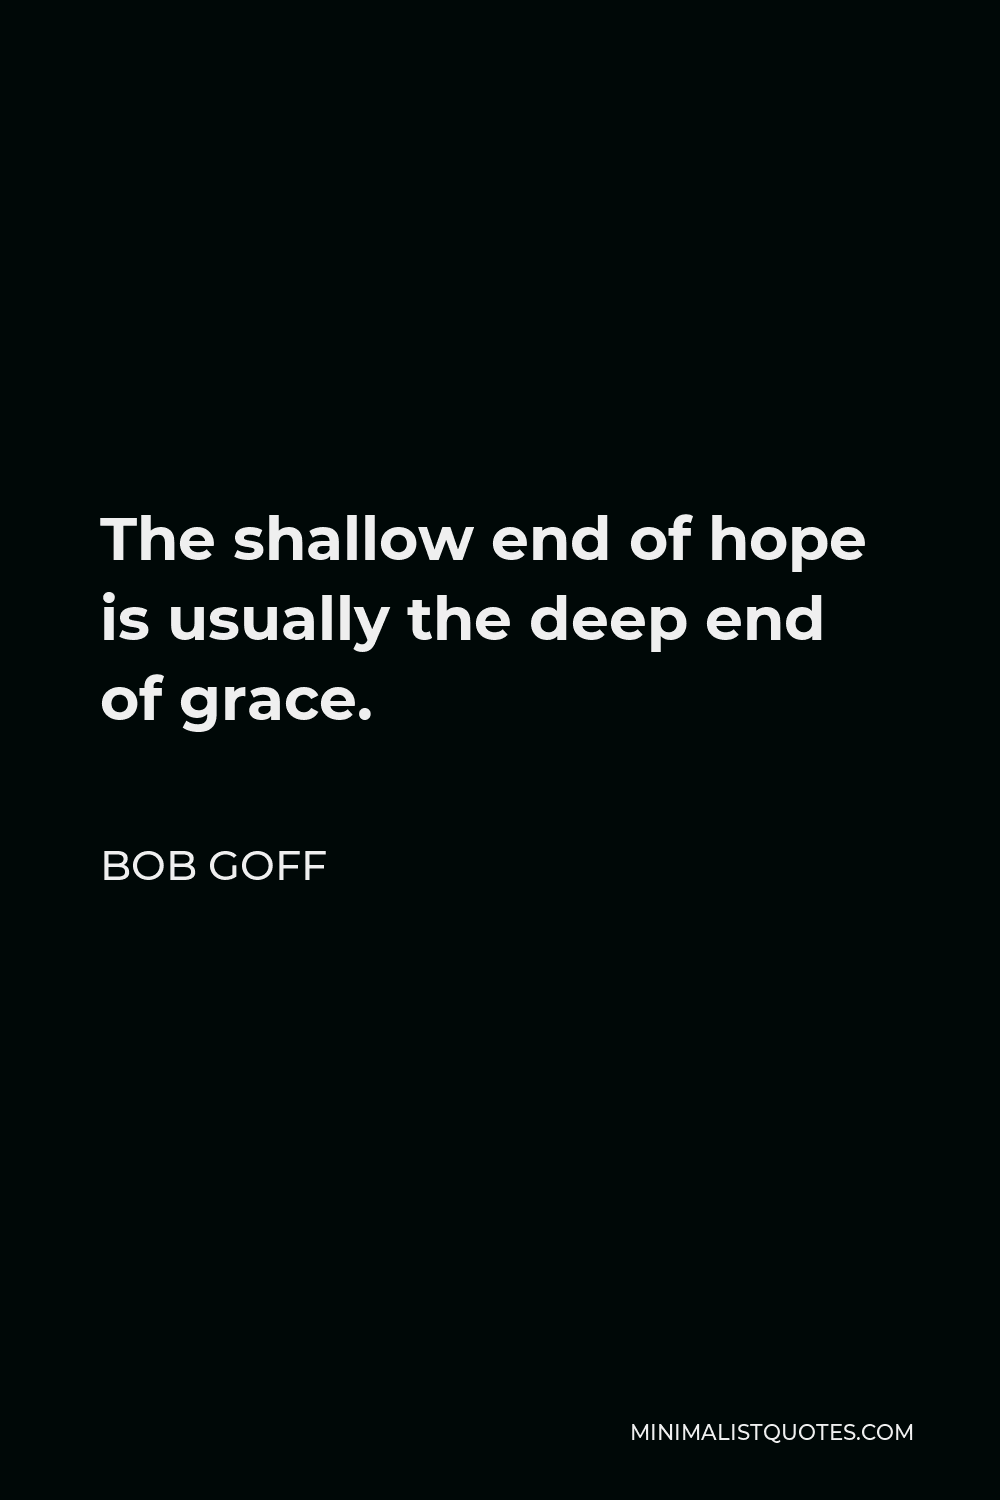 Bob Goff Quote - The shallow end of hope is usually the deep end of grace.